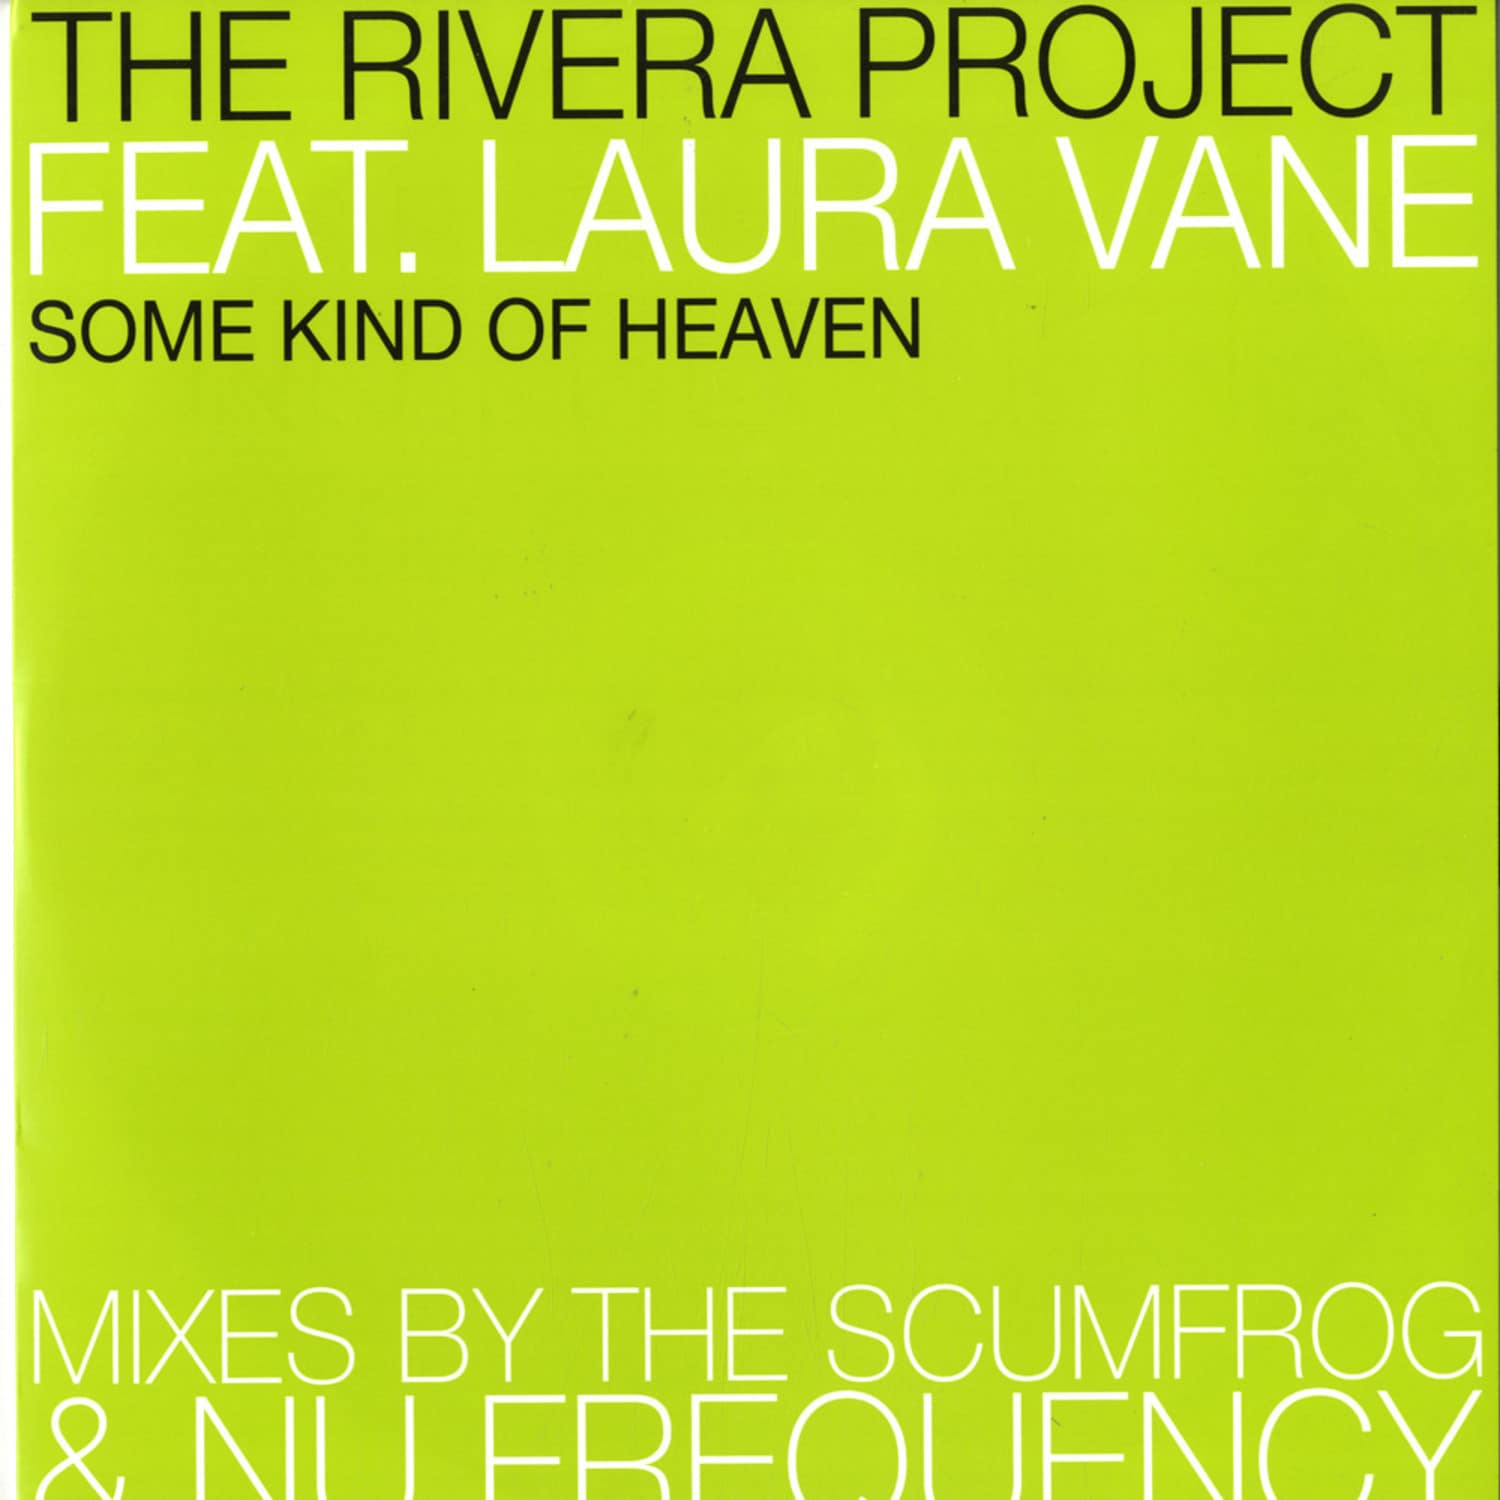 Rivera Project - SOME KIND OF HEAVEN 